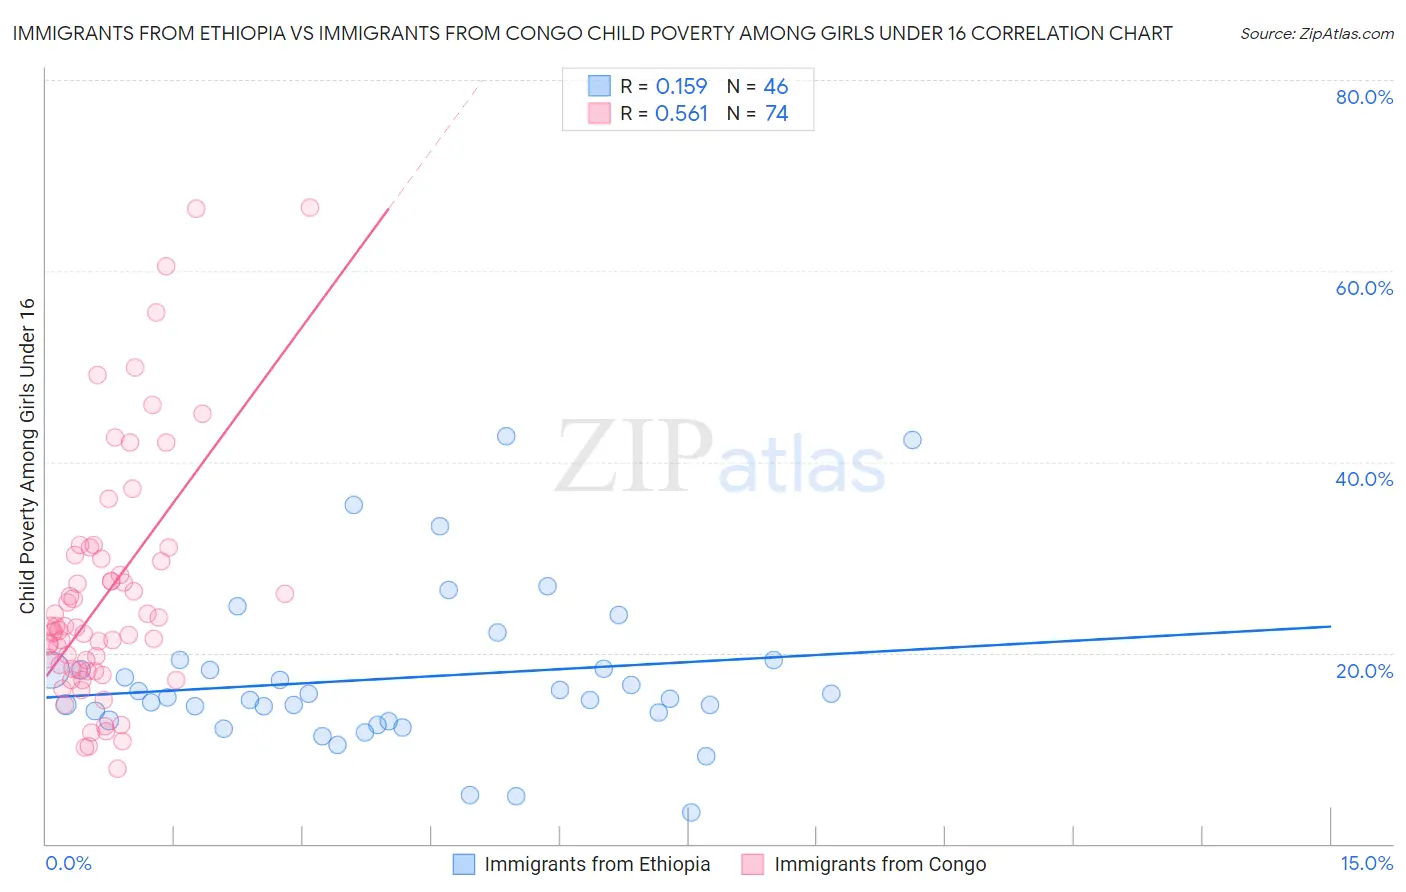 Immigrants from Ethiopia vs Immigrants from Congo Child Poverty Among Girls Under 16